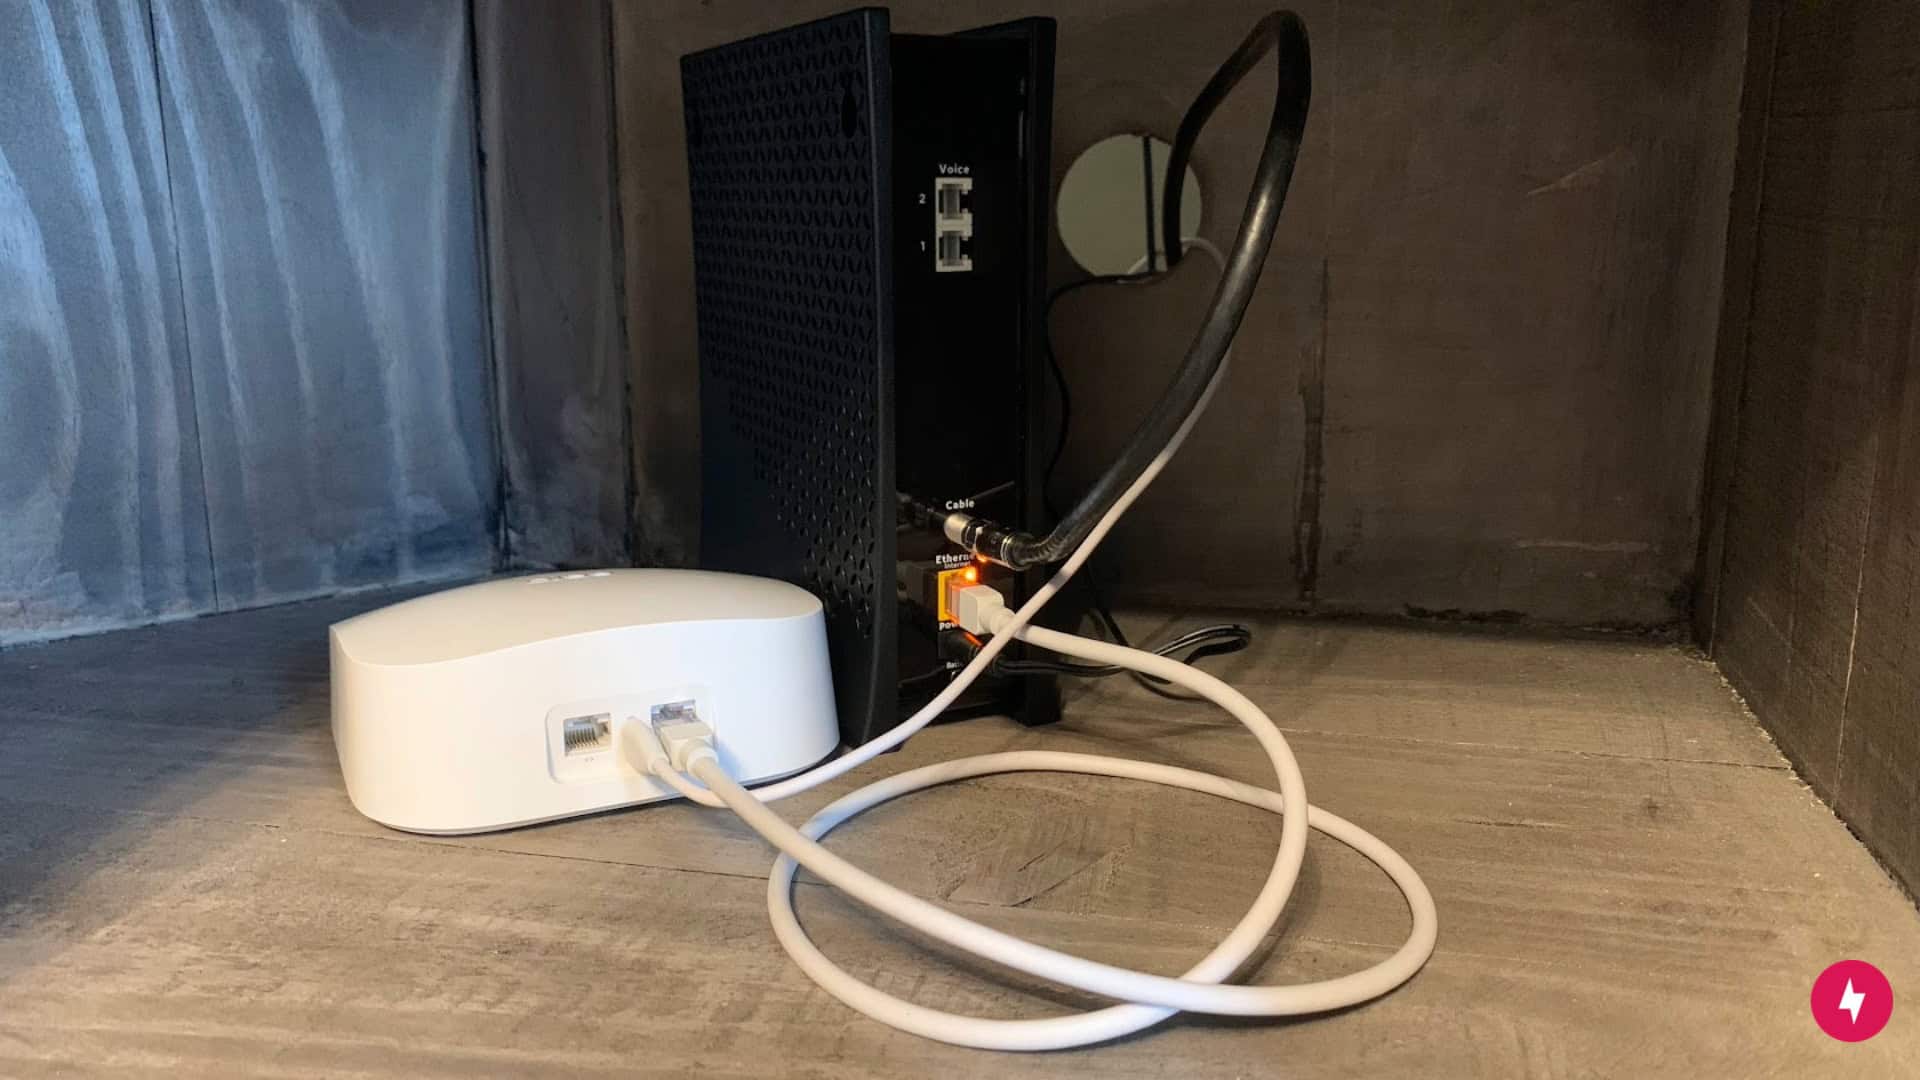  A Spectrum modem and Eero router connect via an Ethernet cord.